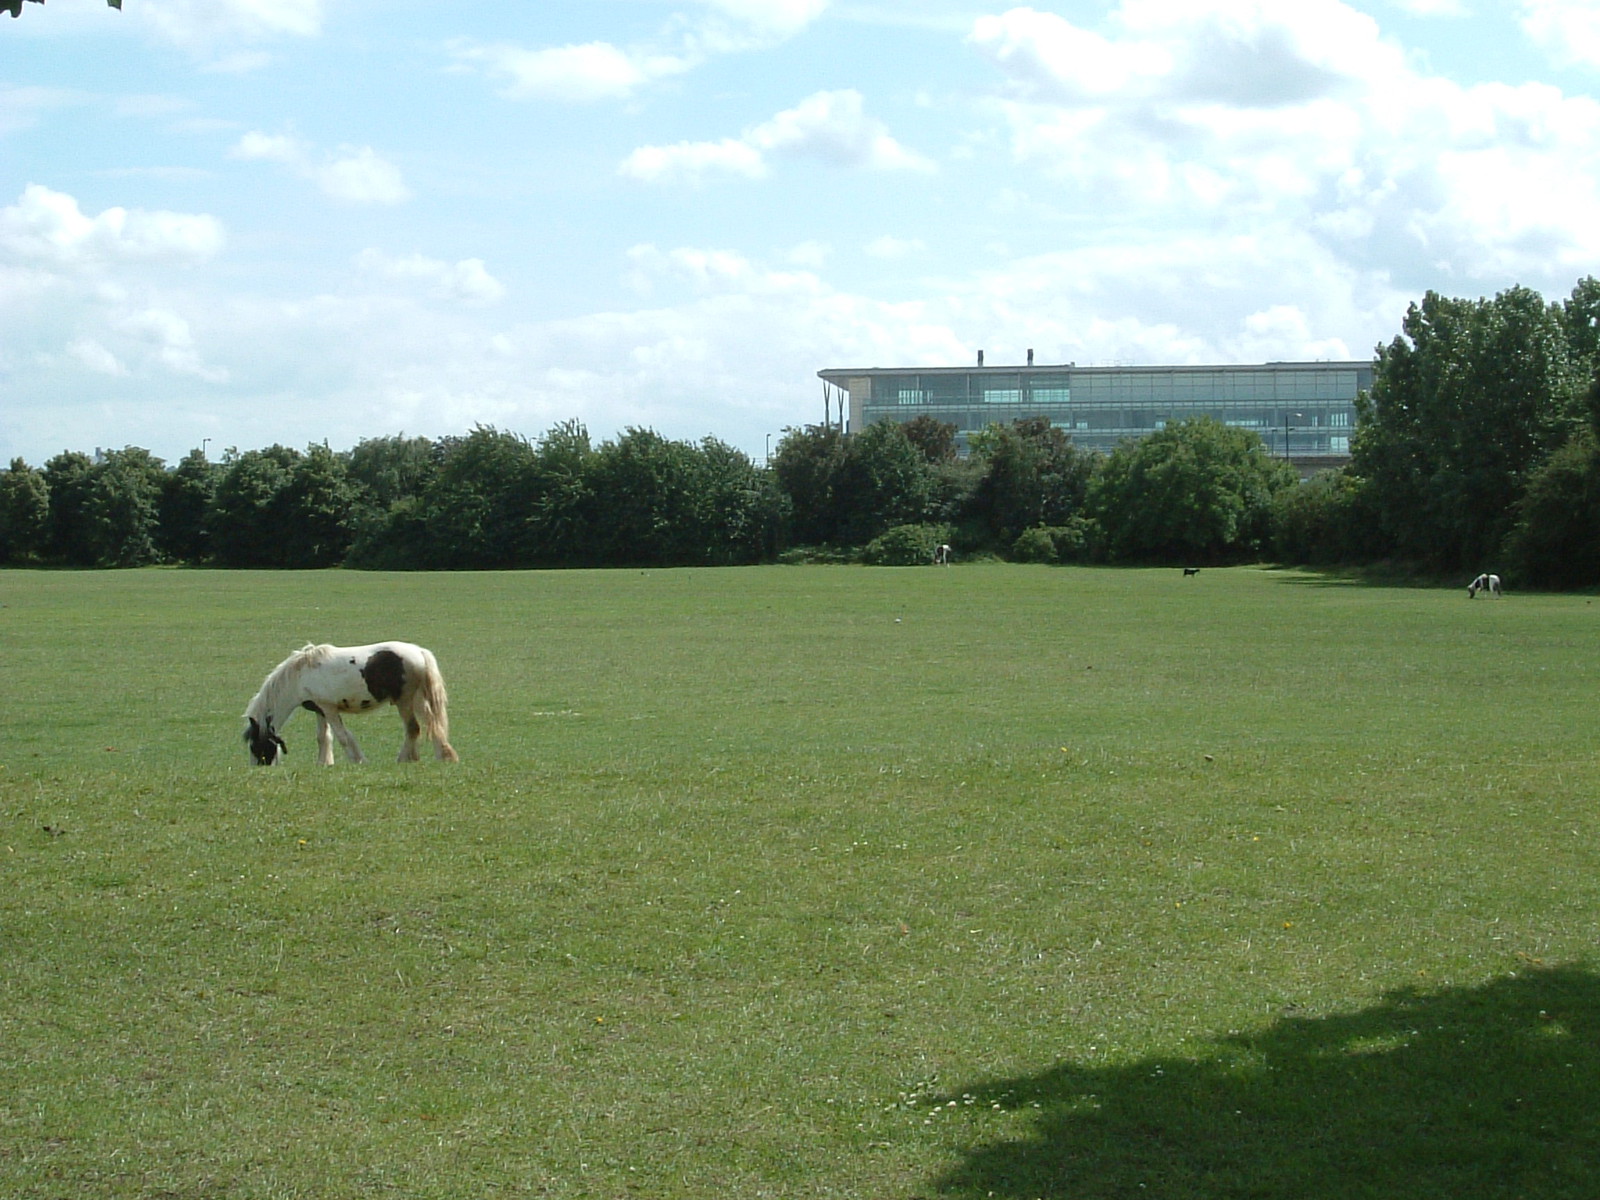 Horses in Beckton District Park with City Airport in the background